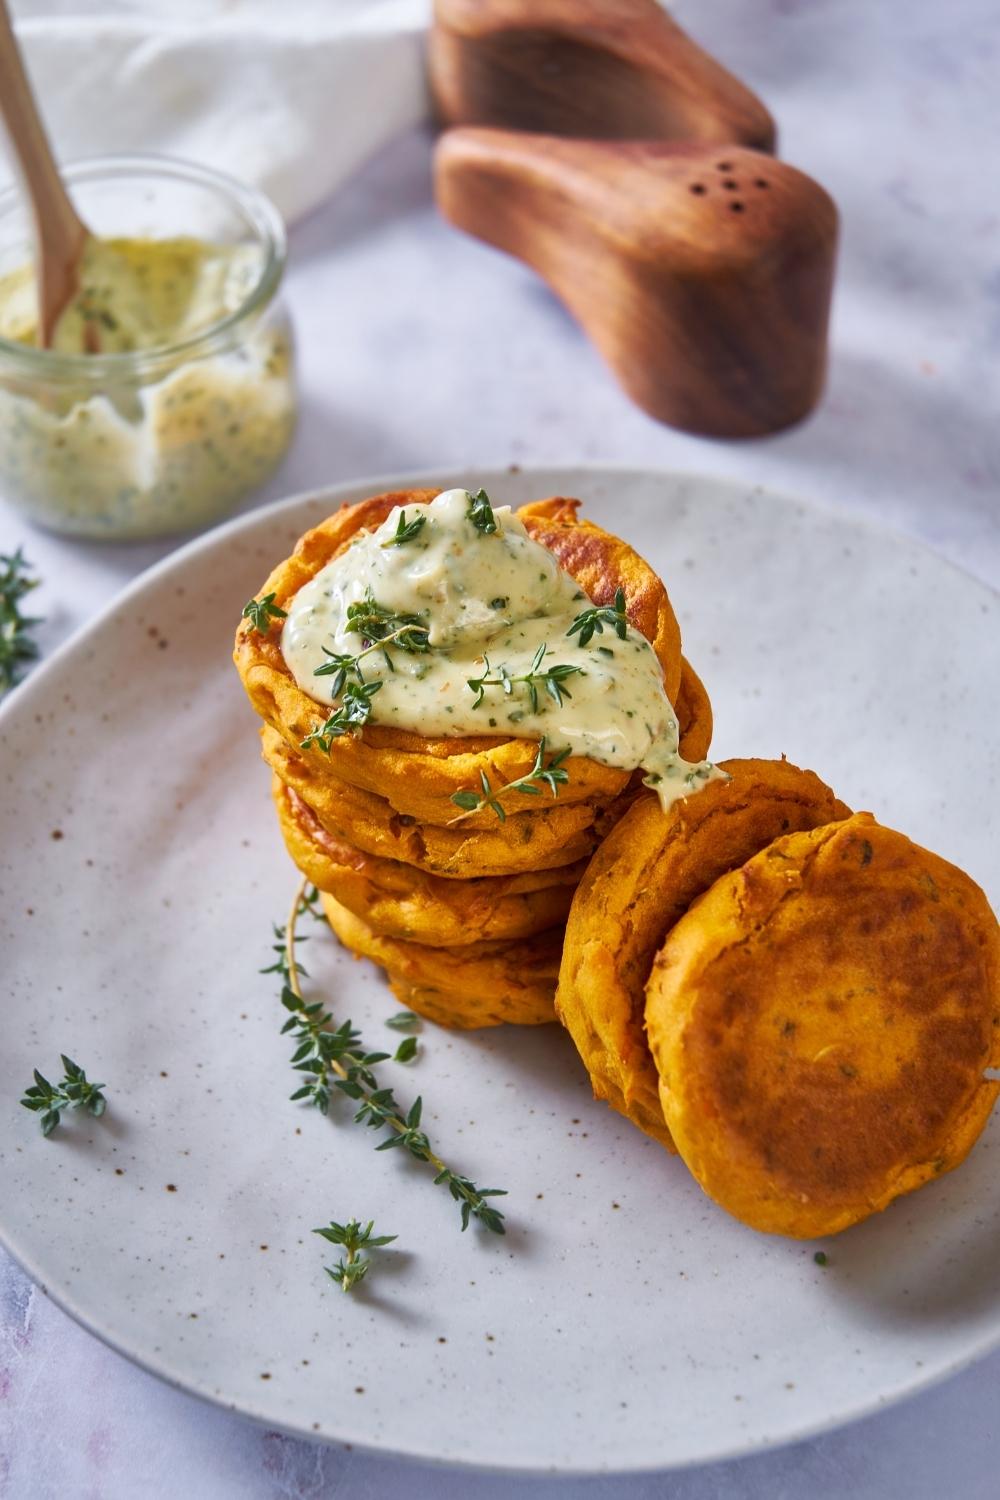 Sweet potato patties stacked on top of each other with some off to the side, topped with an herb mayo and additional fresh herbs. A jar of herb mayo is in the background next to a salt and pepper shaker.